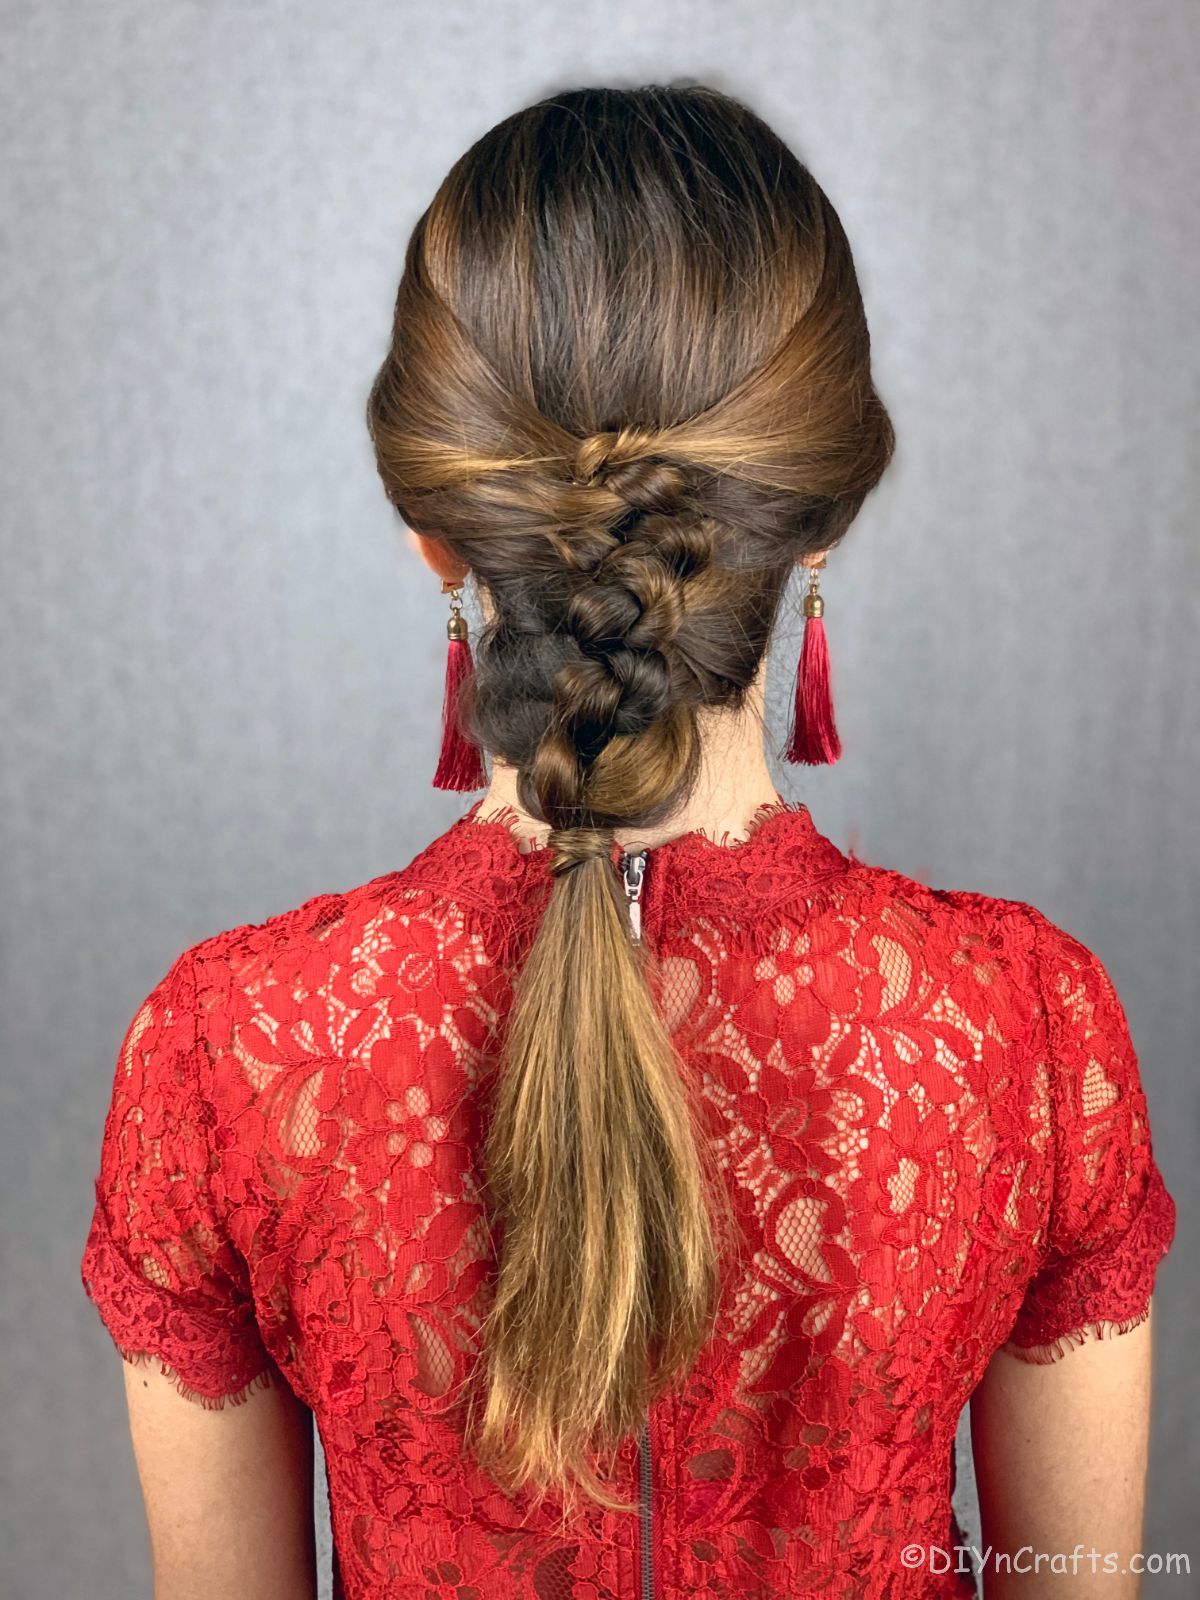 woman in red shirt with knotted braided hair